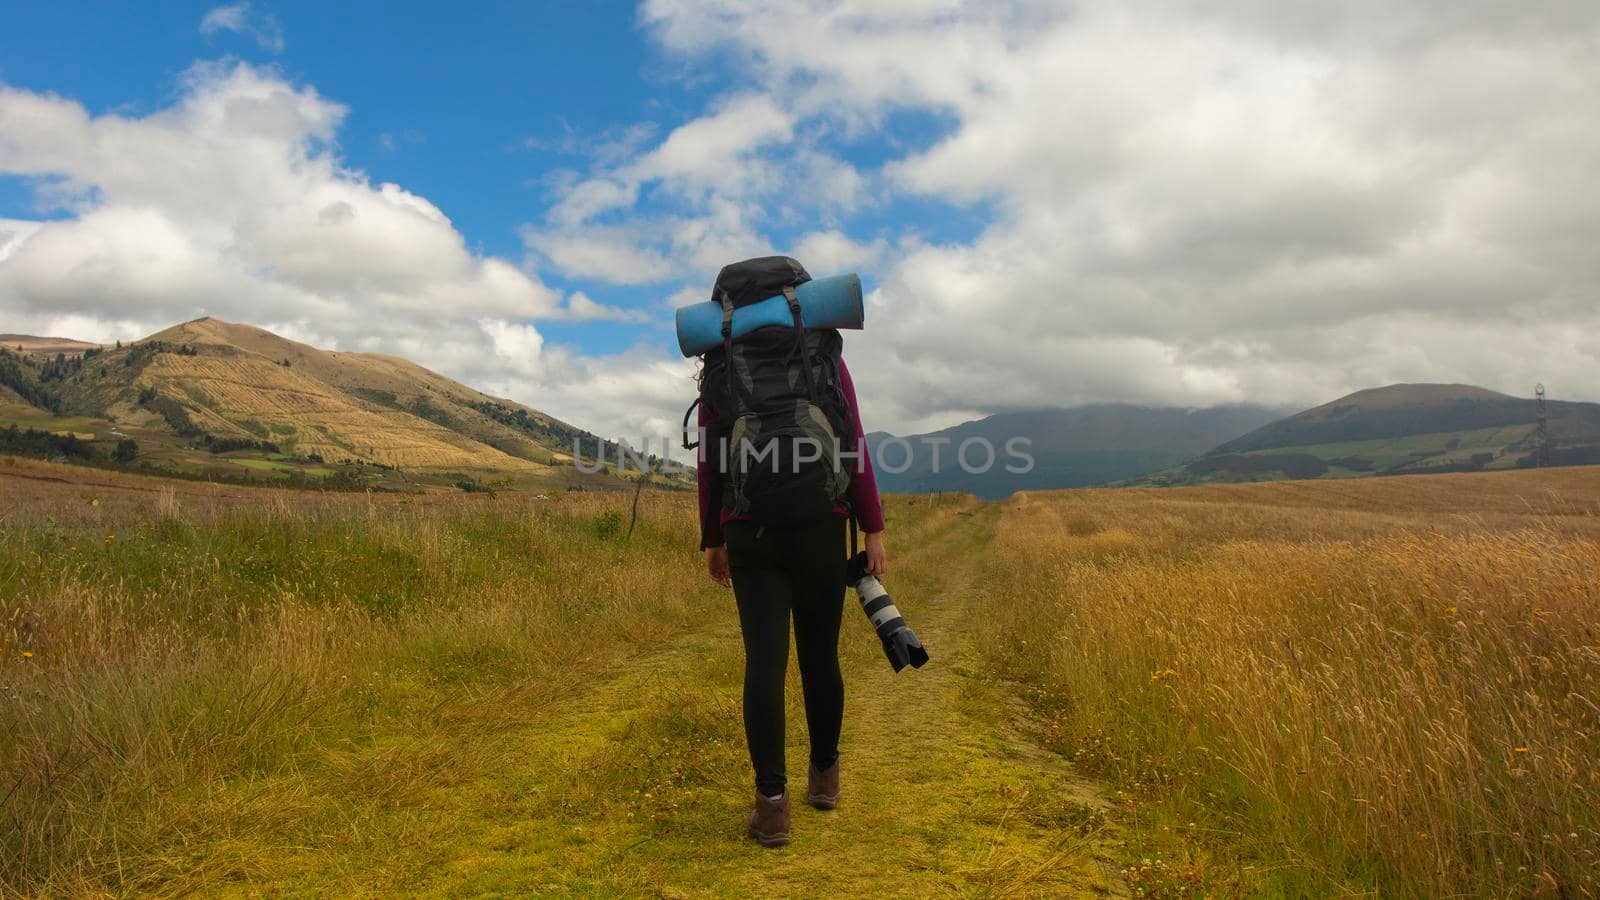 Beautiful Hispanic female explorer seen from behind with backpack walking with a camera in hand in the middle of a sown field by alejomiranda